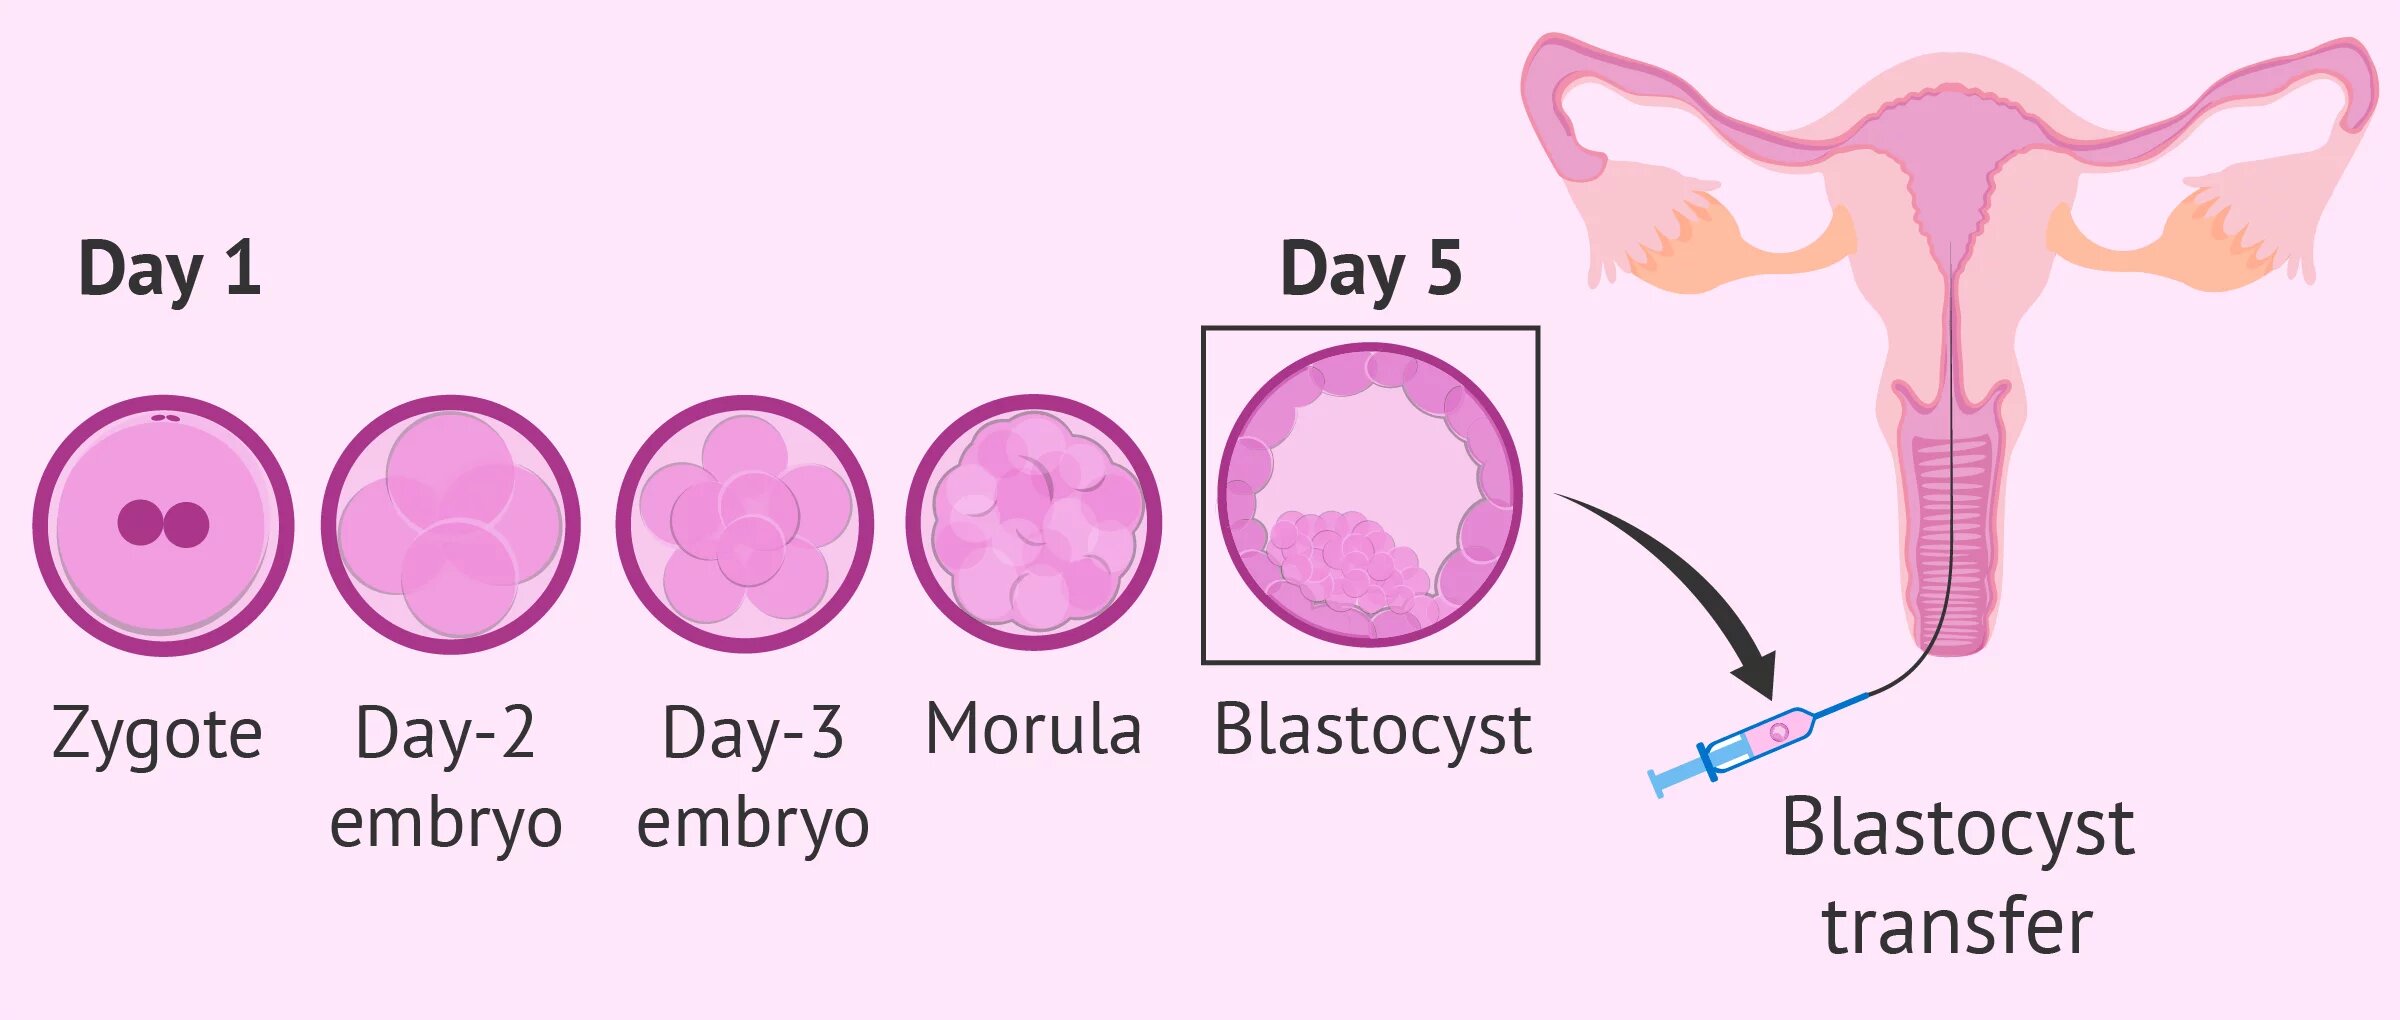 culture to blastocyst transfer